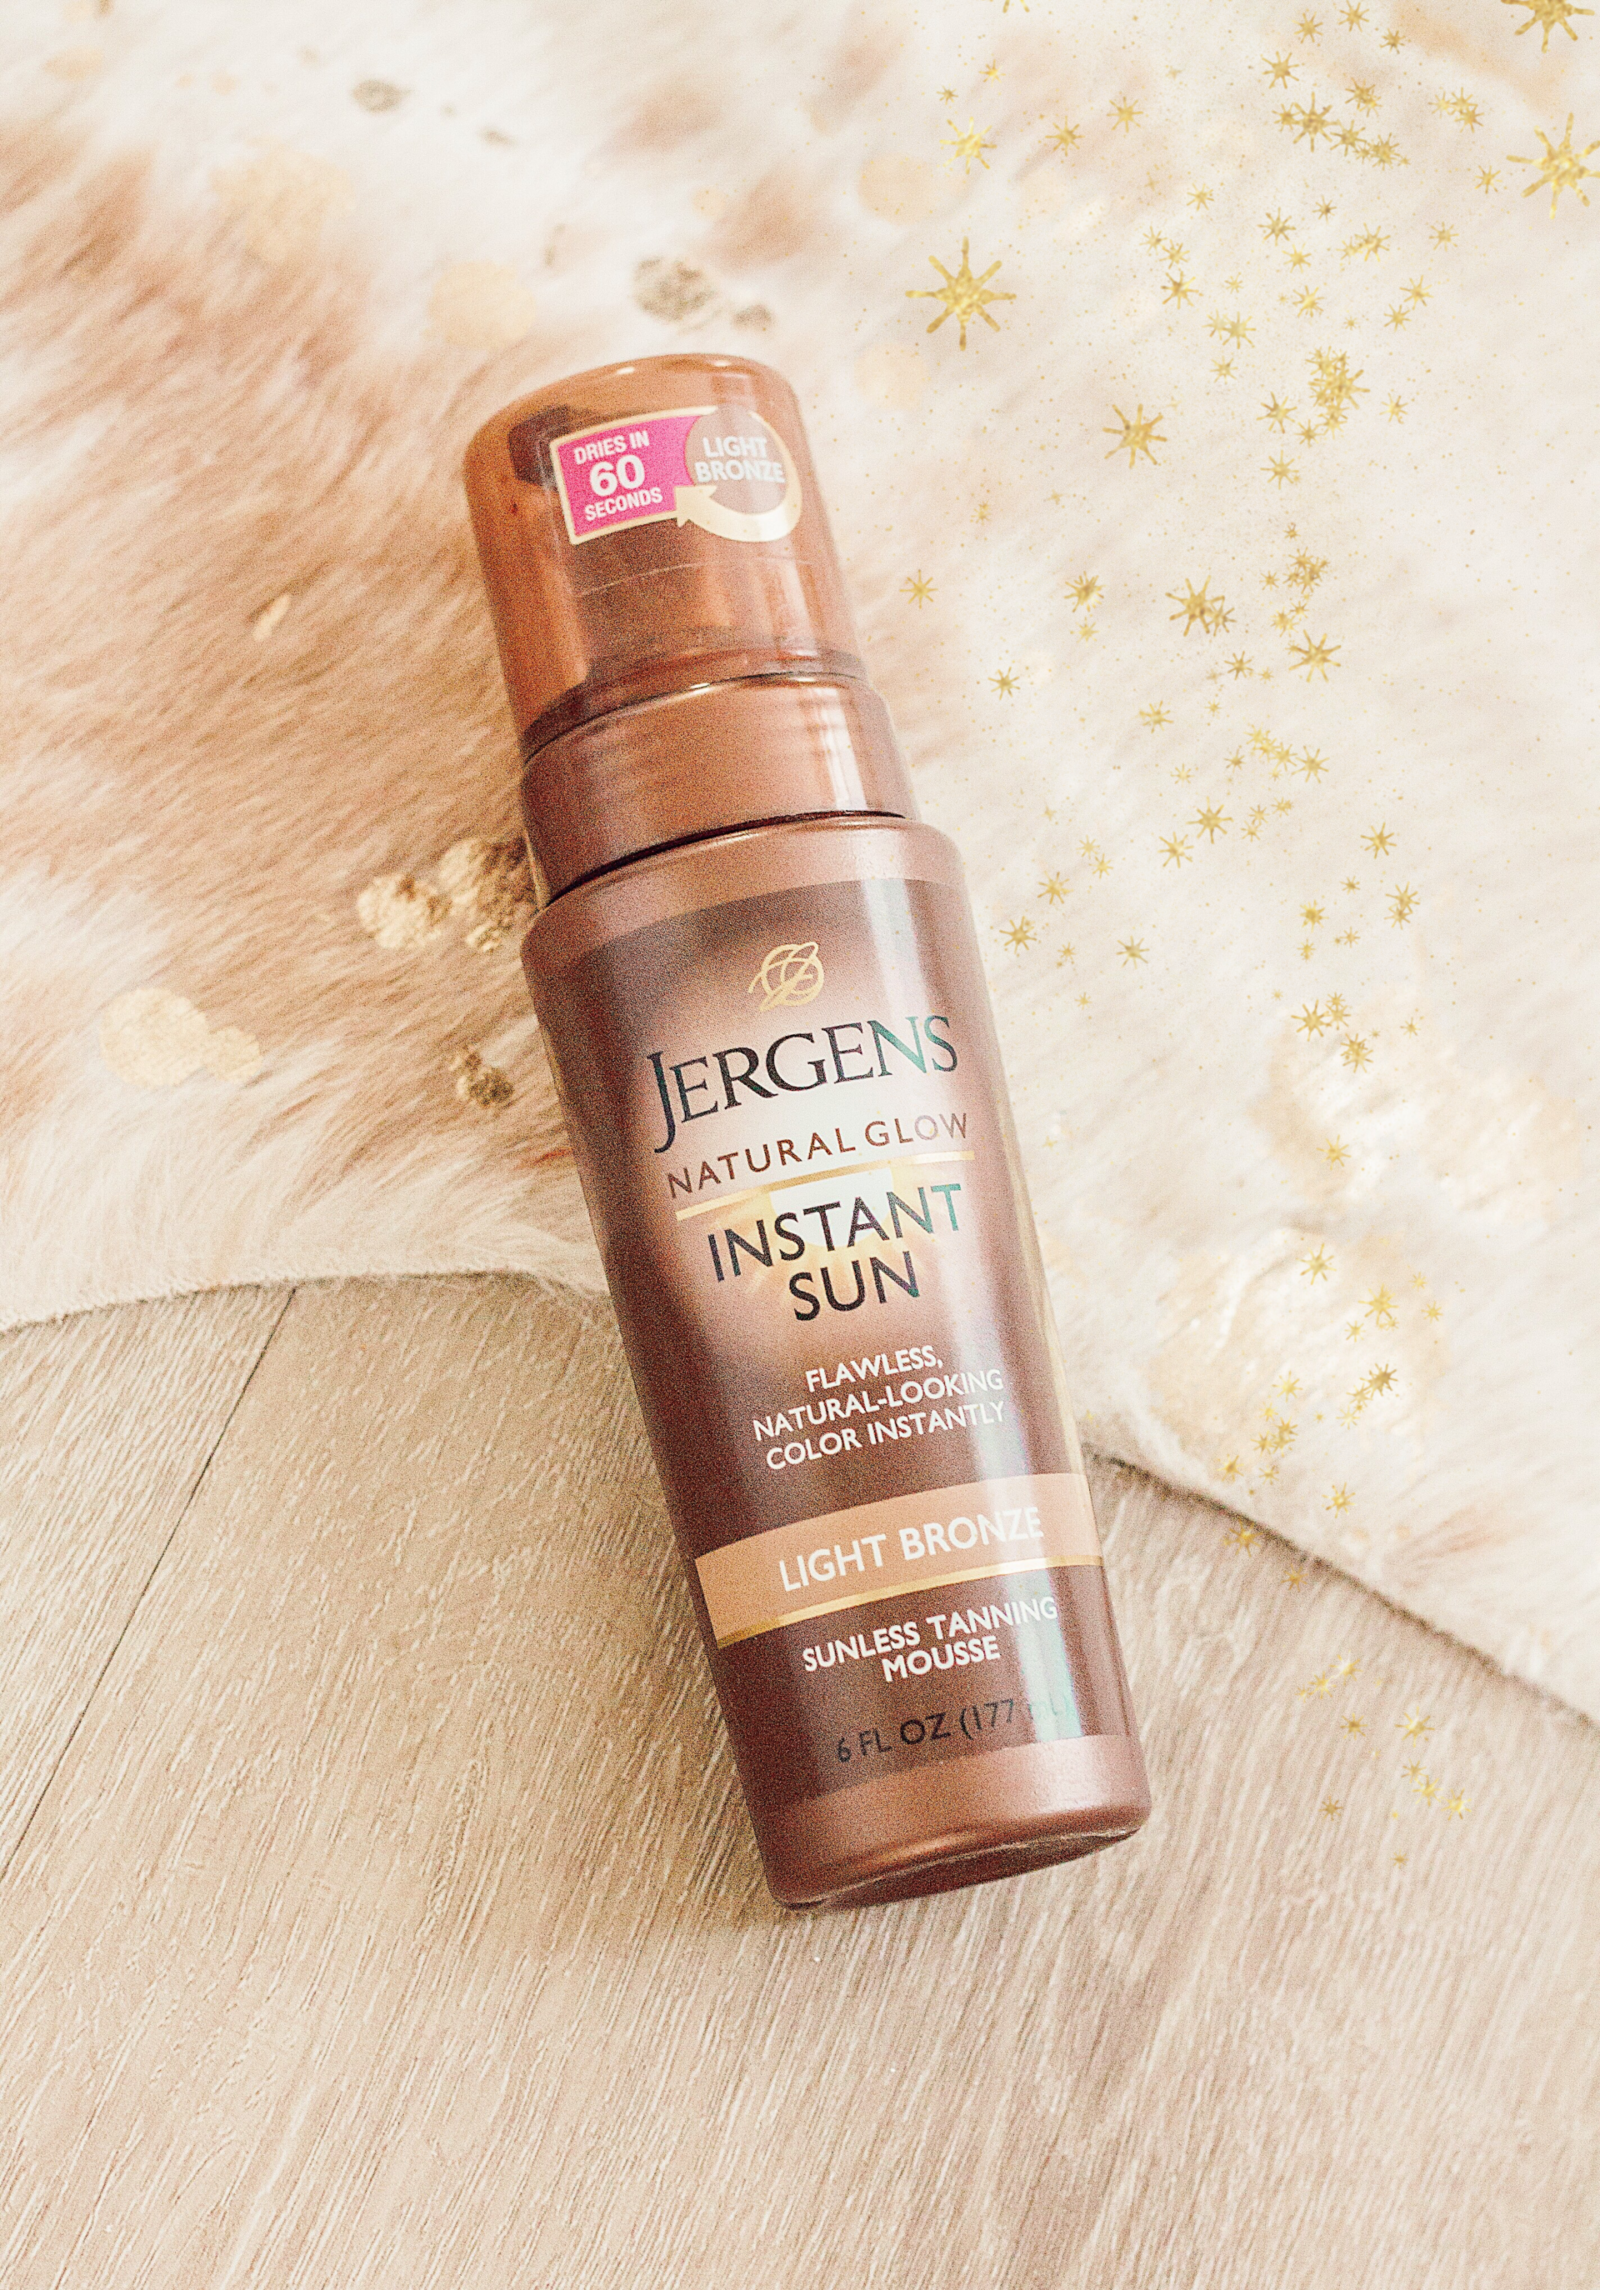 My Drugstore Self-Tanning Routine with Jergens Natural Glow Instant Sun Mousse